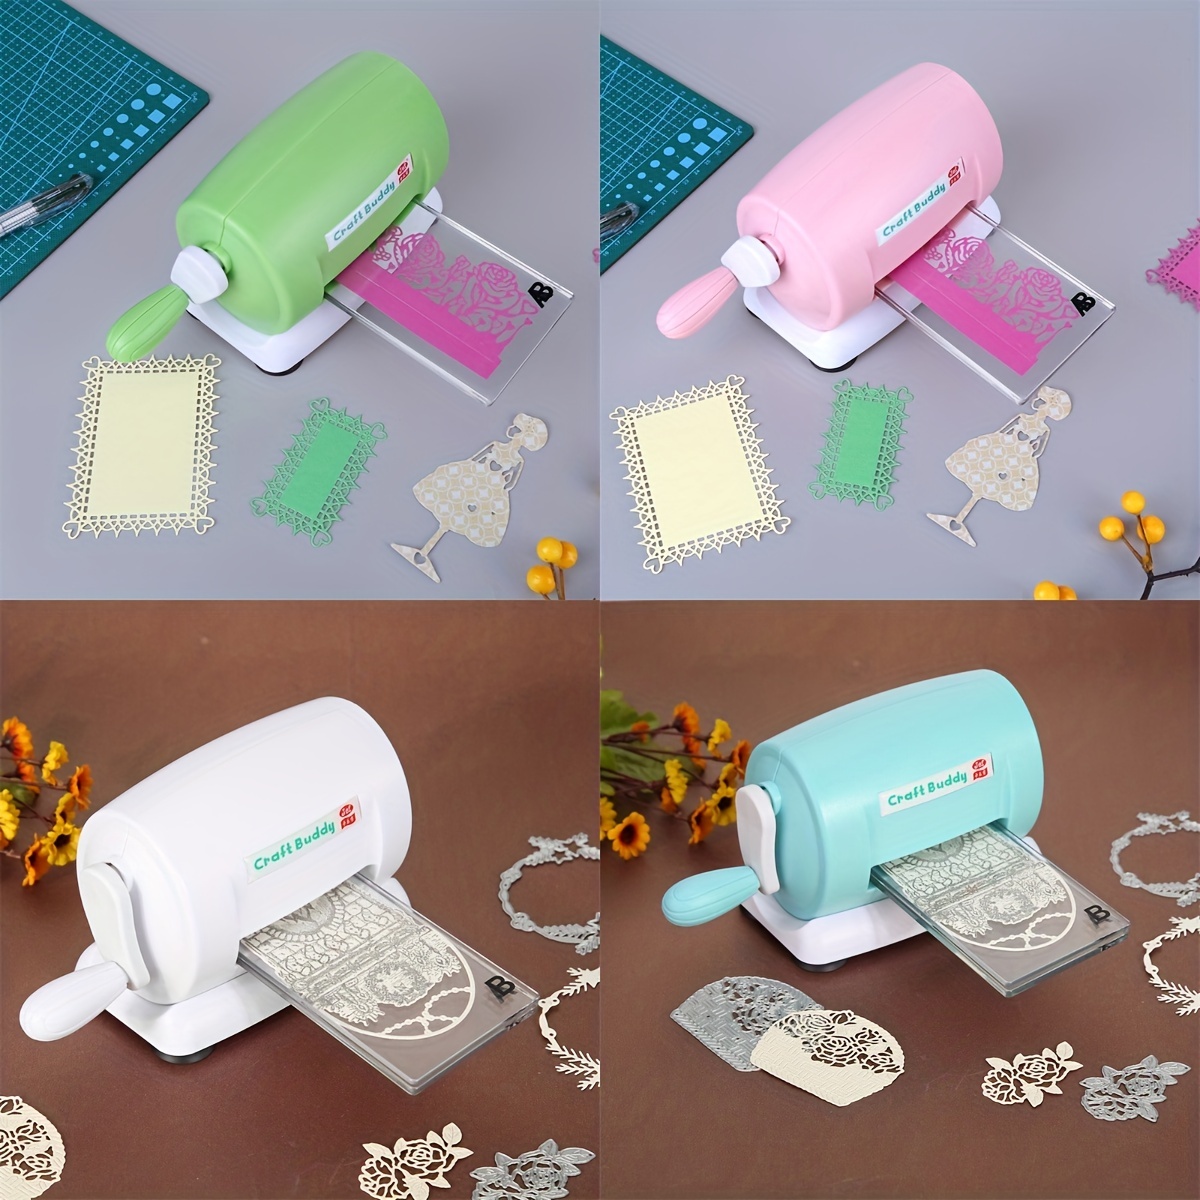 Portable Mini Die Cutting Machine For DIY Scrapbooking Embossing Crafts  Photo Paper Card Decorations Handmake Projects Tools